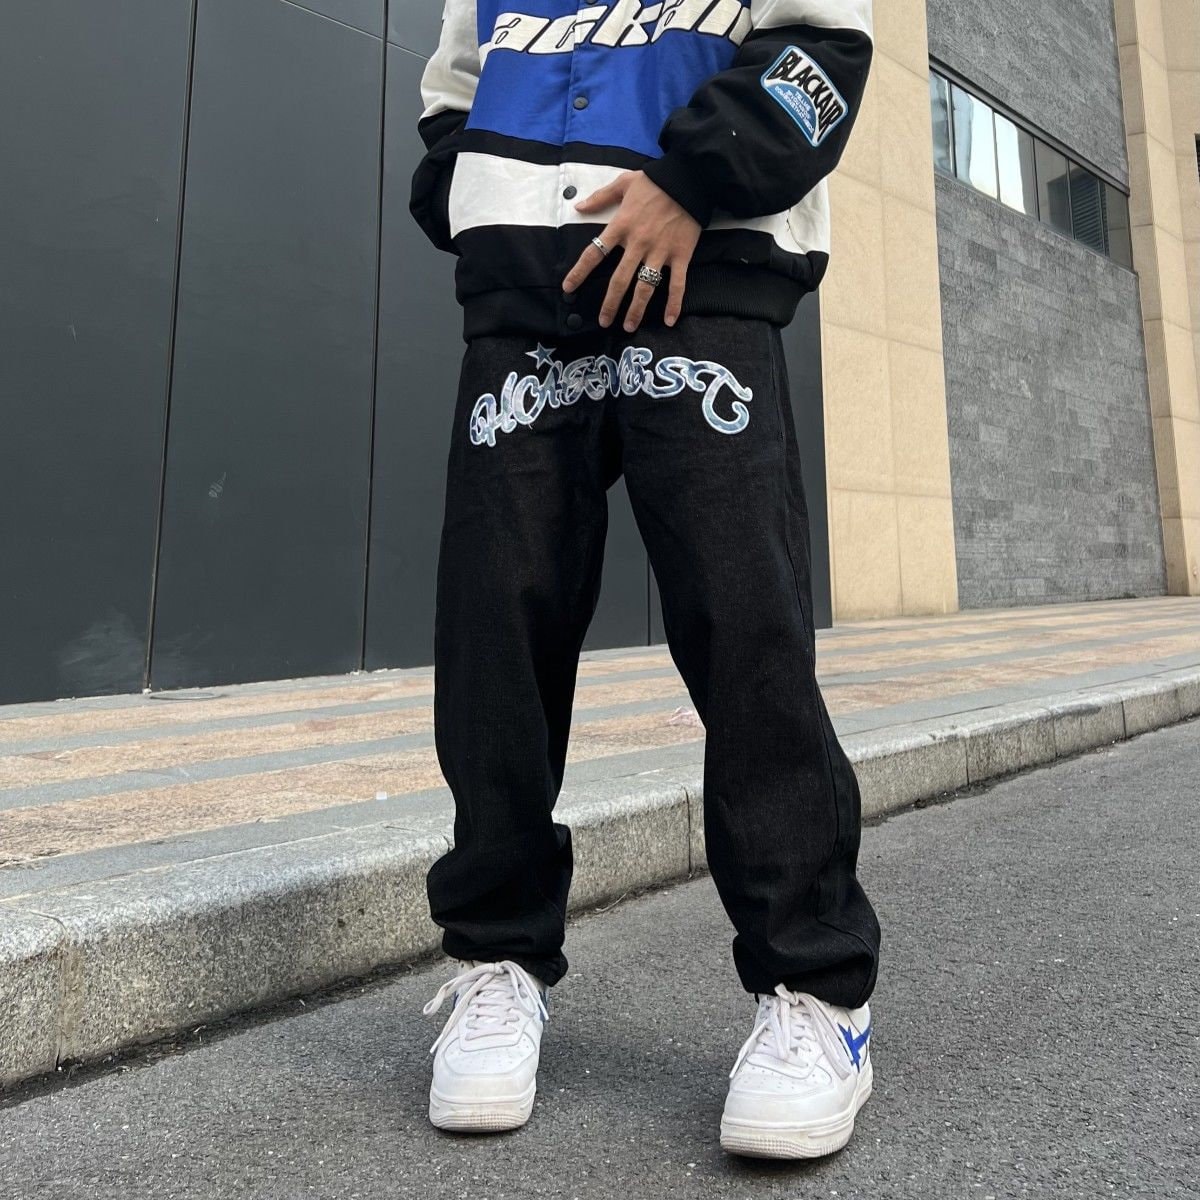 Streetwear Trousers Vintage Trousers Gothic Trousers Streetwear Style Trousers Y2k Style Trousers Black Trousers Printed Trousers